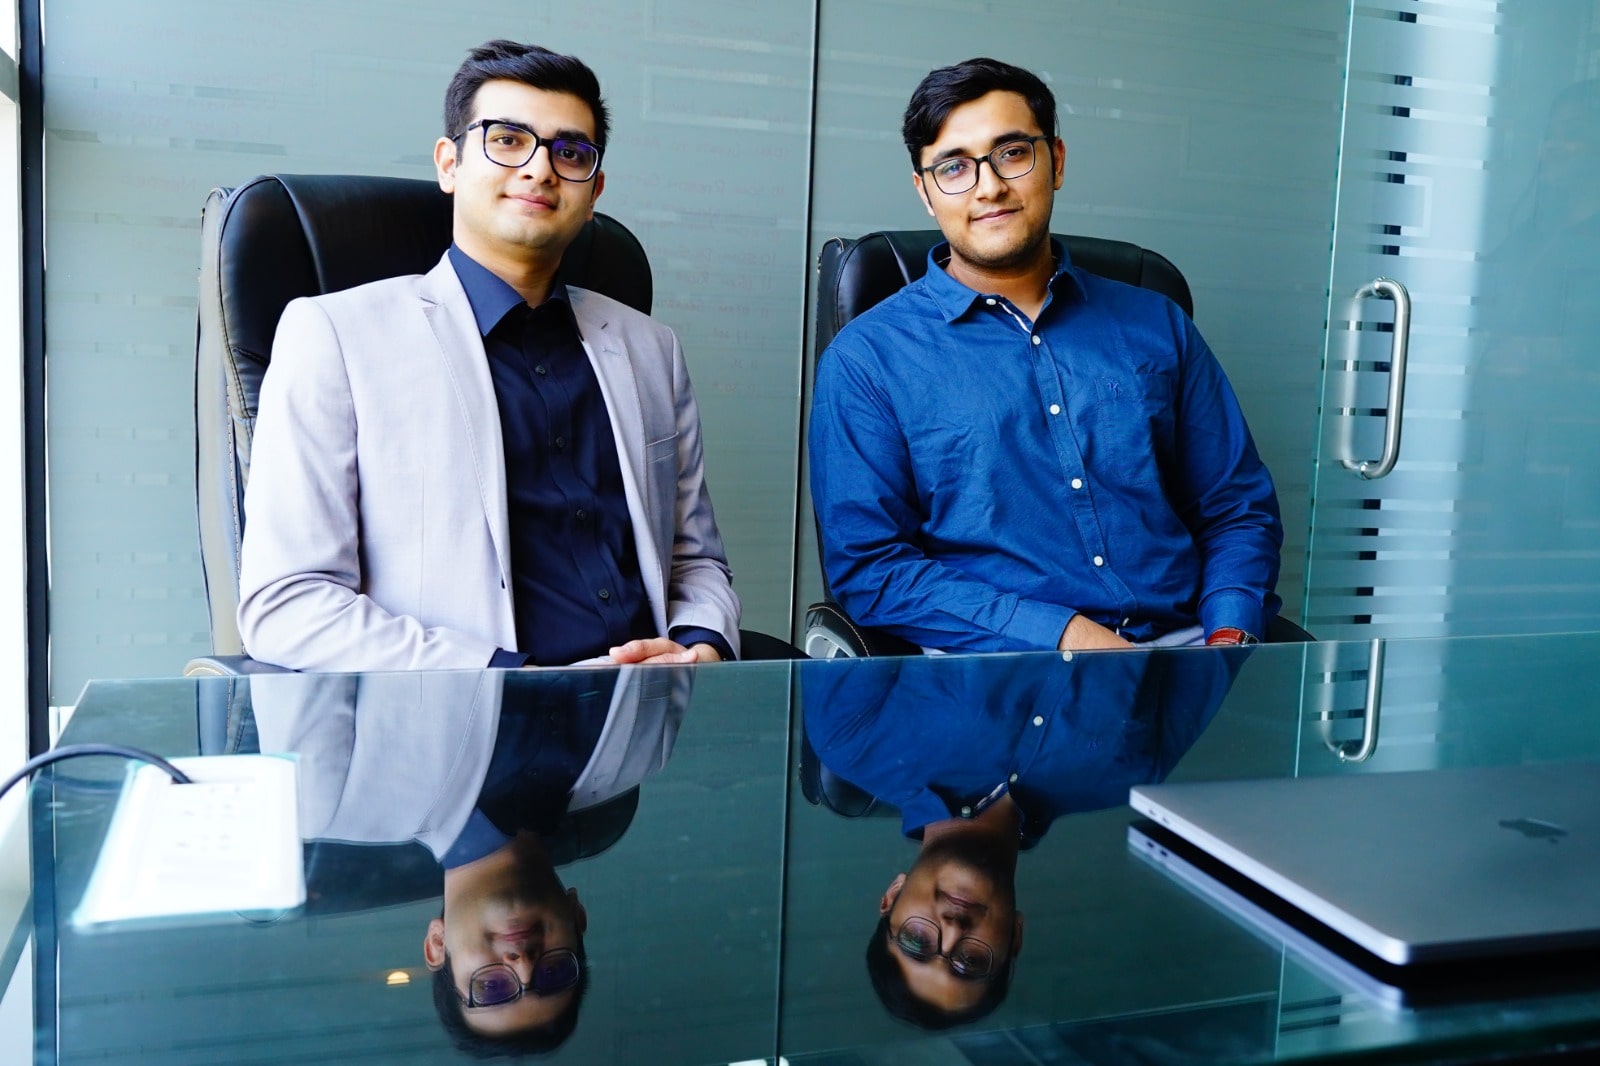 Awais Ahmed and Kshitij Khandelwal, Founders of Pixxel